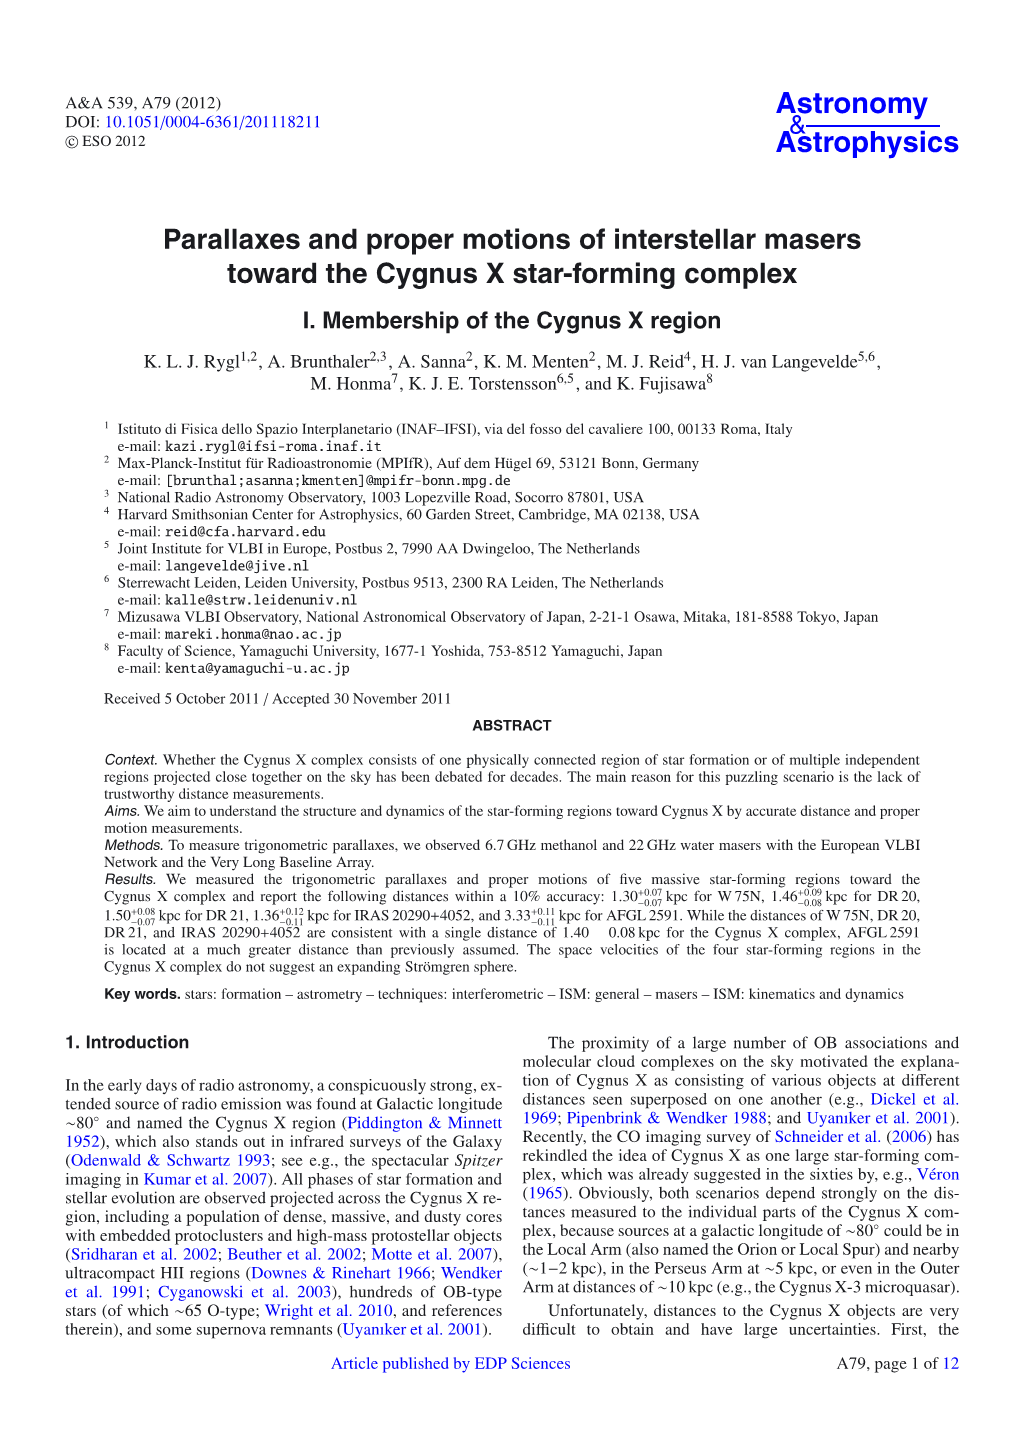 Parallaxes and Proper Motions of Interstellar Masers Toward the Cygnus X Star-Forming Complex I